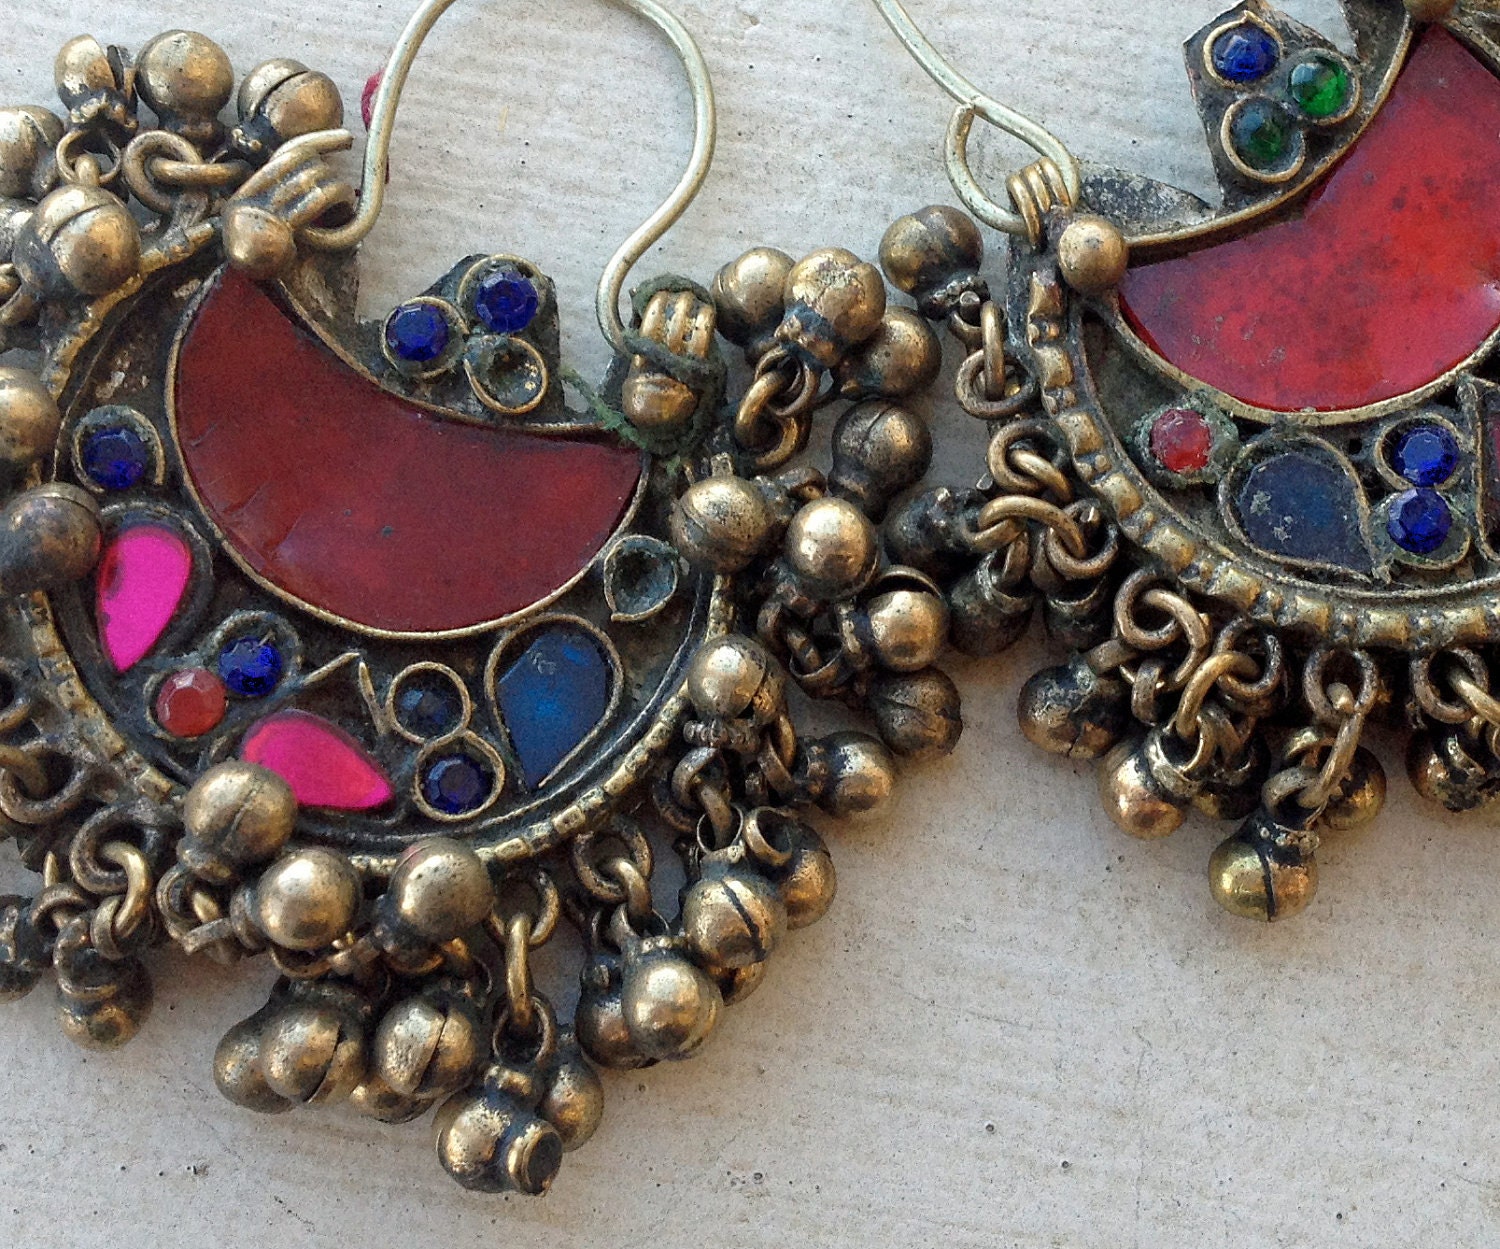 Kuchi Earrings or Pendant Pair (21): American Tribal Style Belly Dance, Assemblage Supply